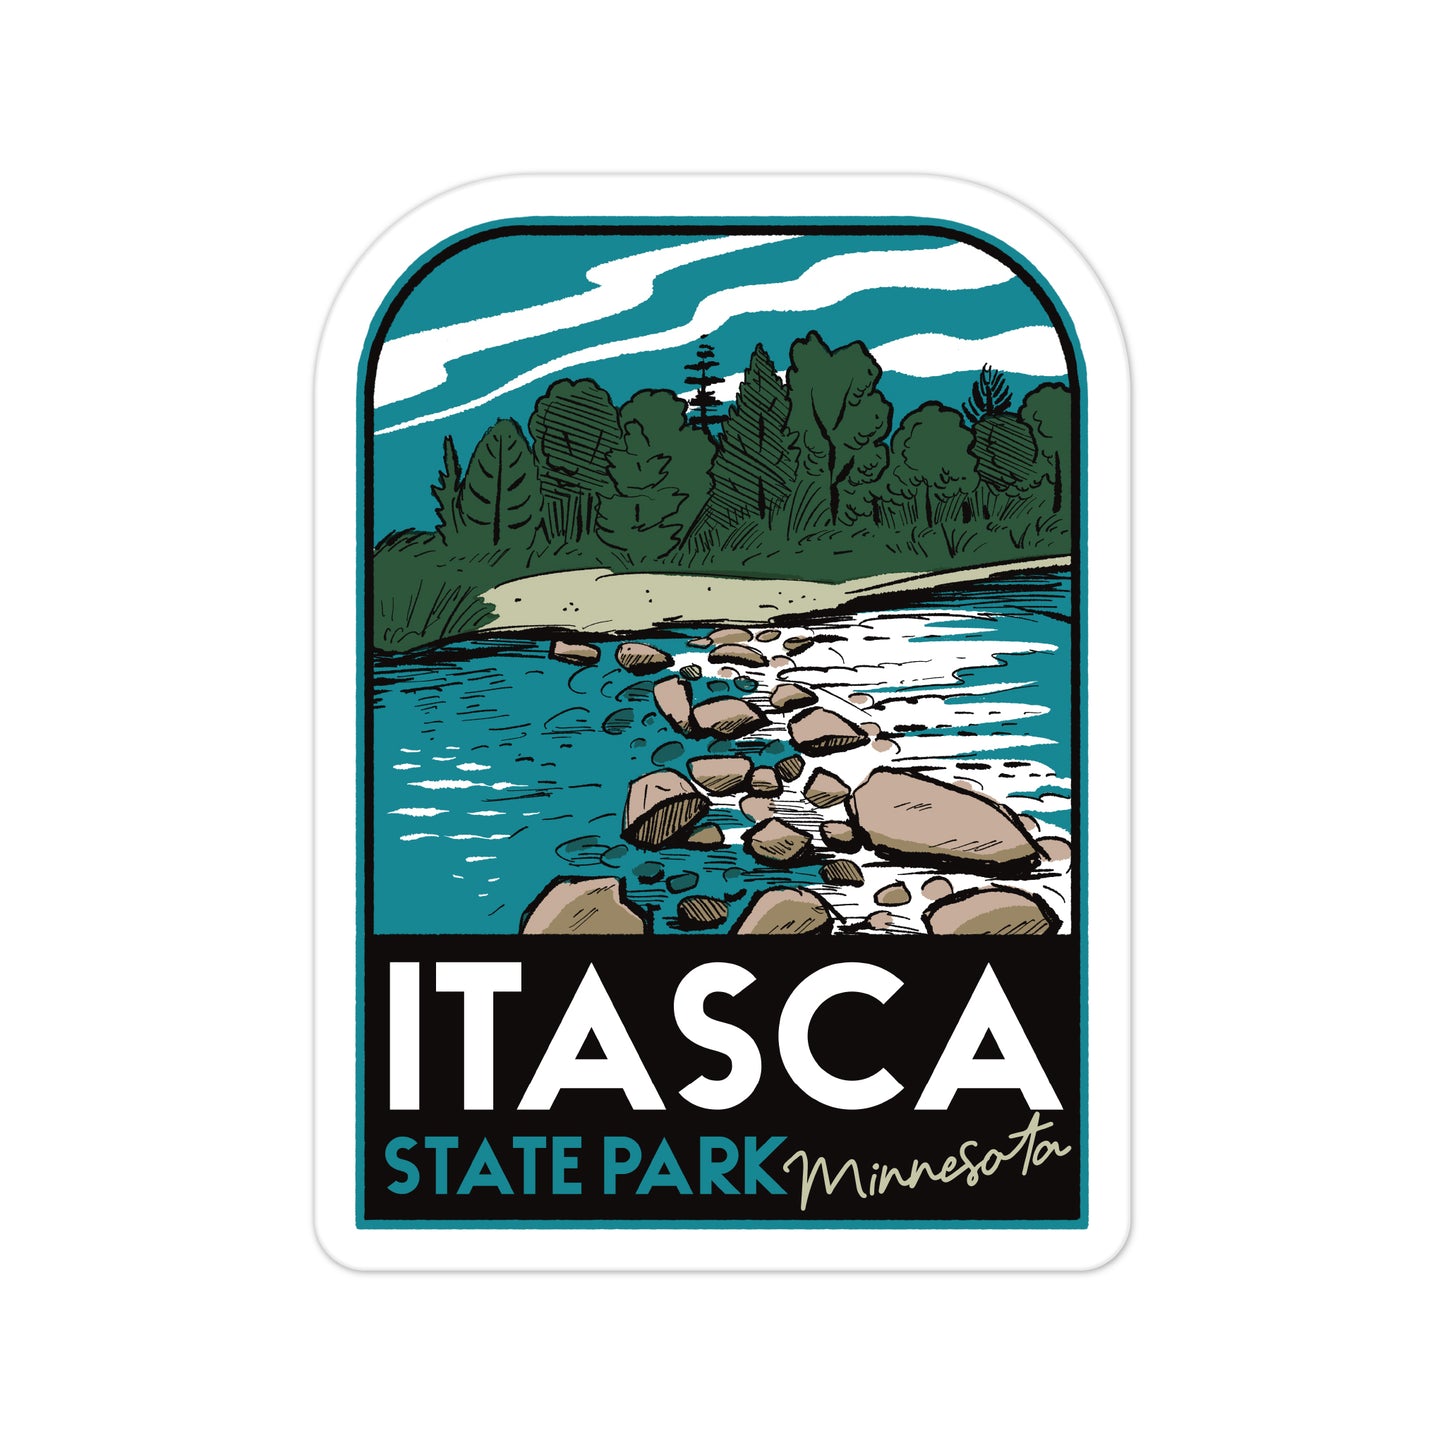 A sticker of Itasca State Park